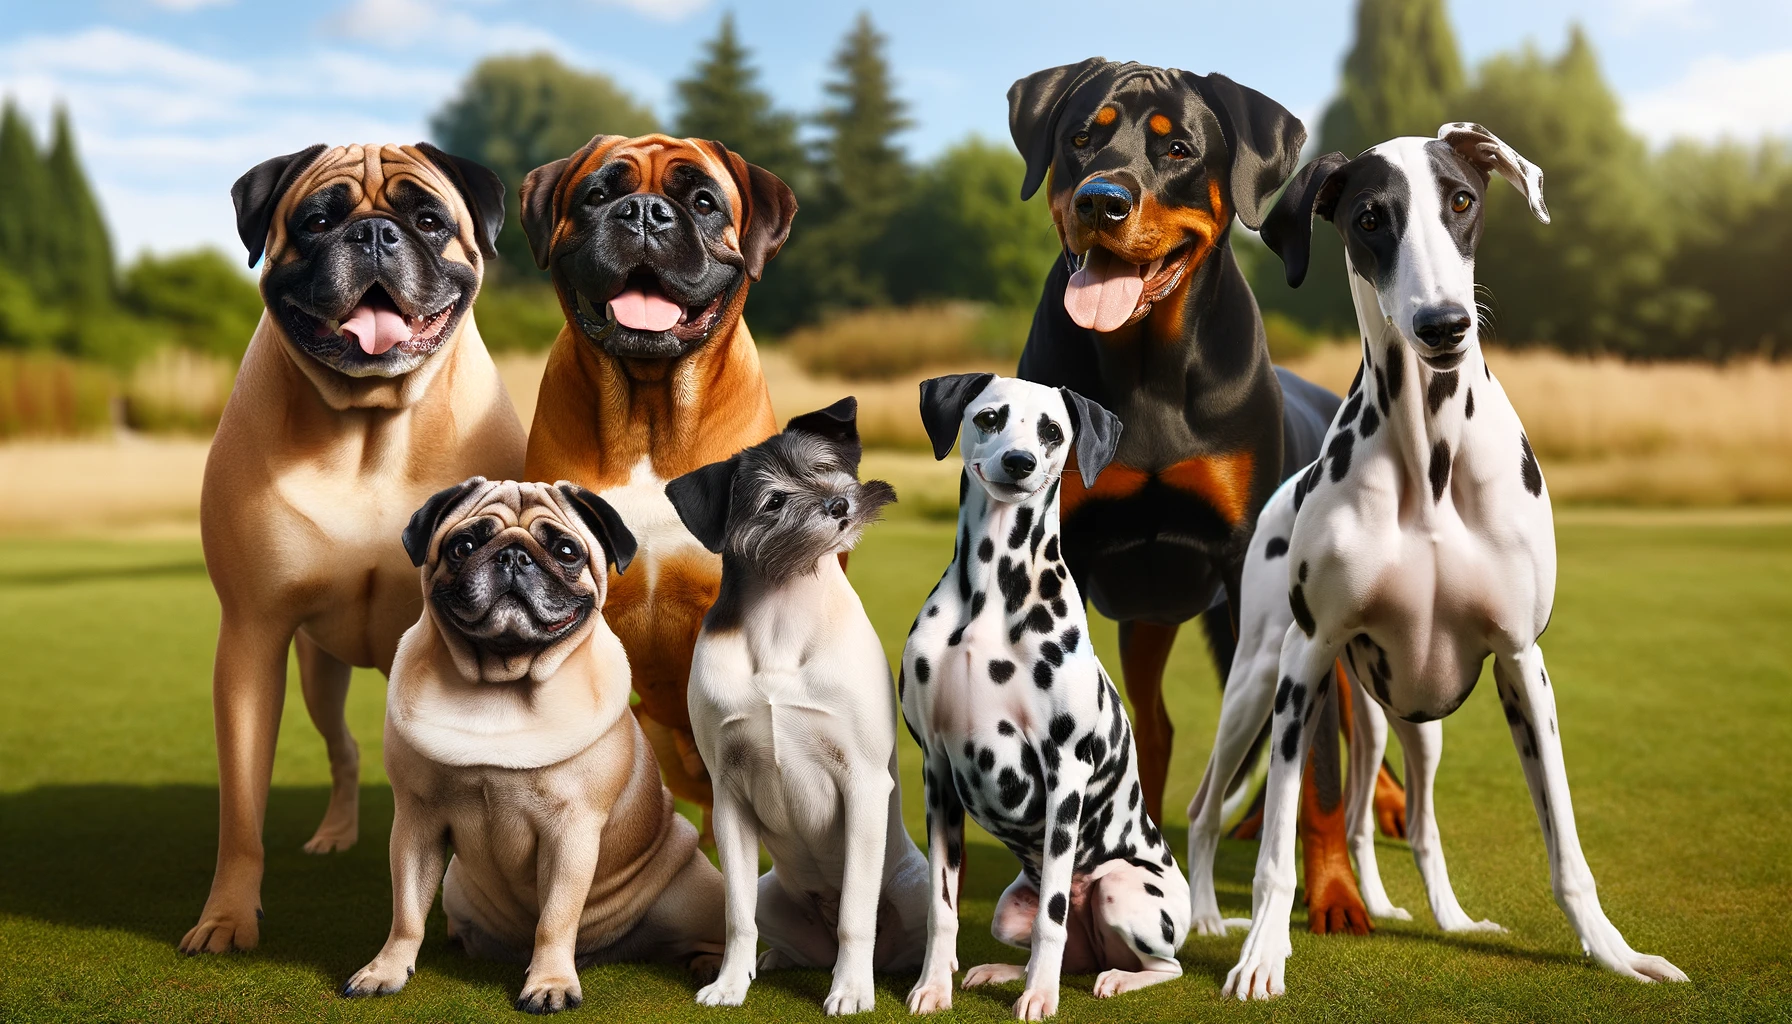 DALL·E 2024-05-15 16.45.25 - A variety of short-haired dog breeds together in a playful outdoor setting. Include a Pug with its wrinkled face, a muscular Boxer, a large and powerf